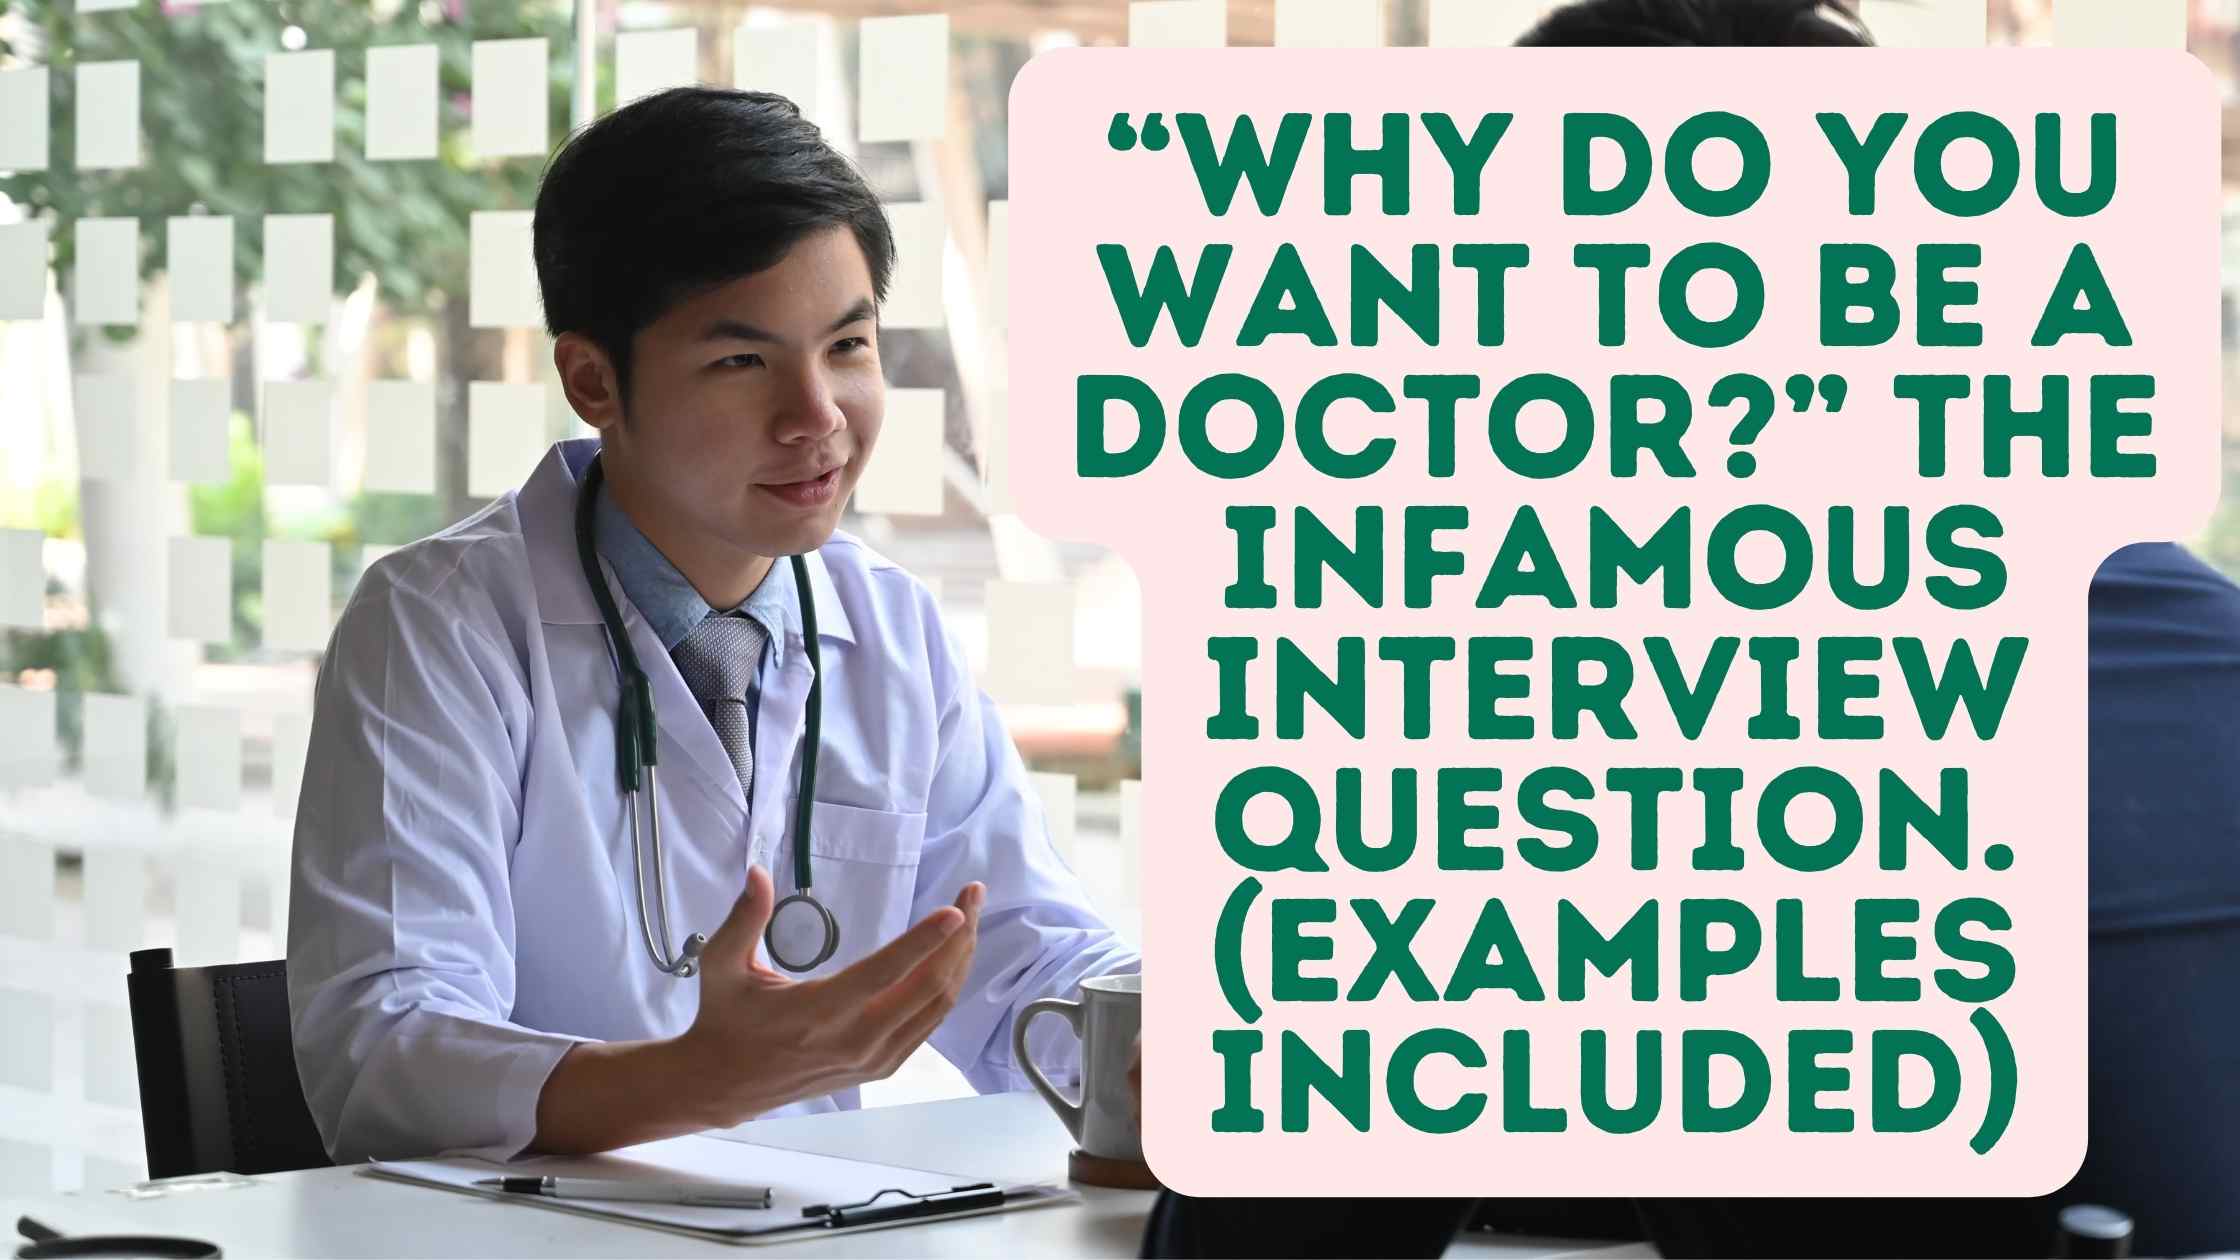 How do you answer why do you want to do medicine?